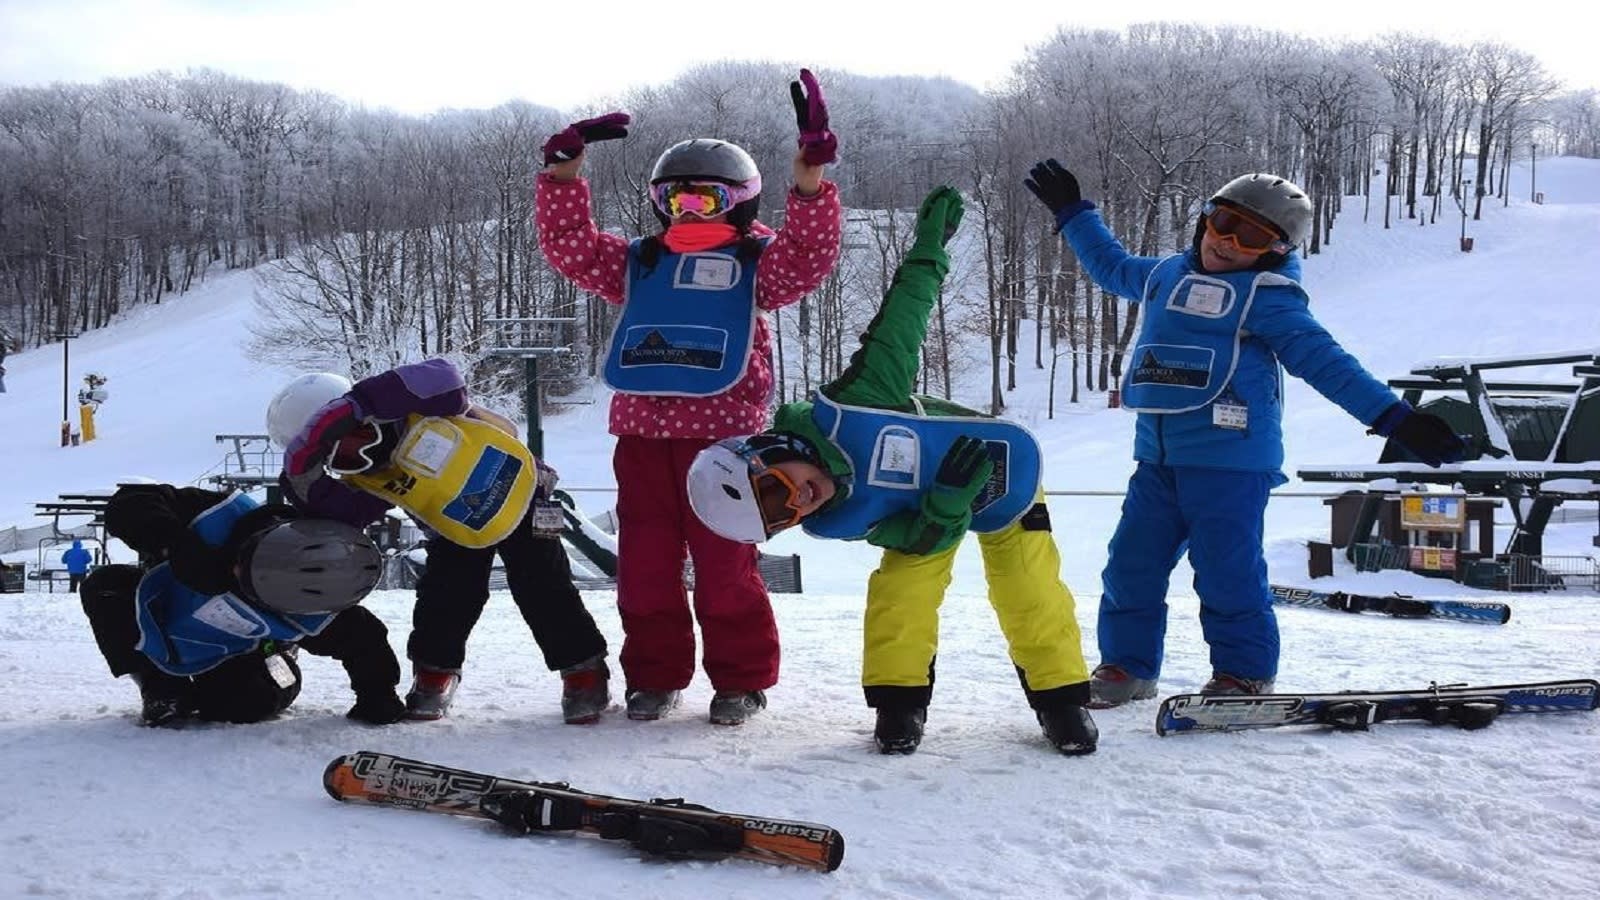 Families Love Skiing at Hidden Valley